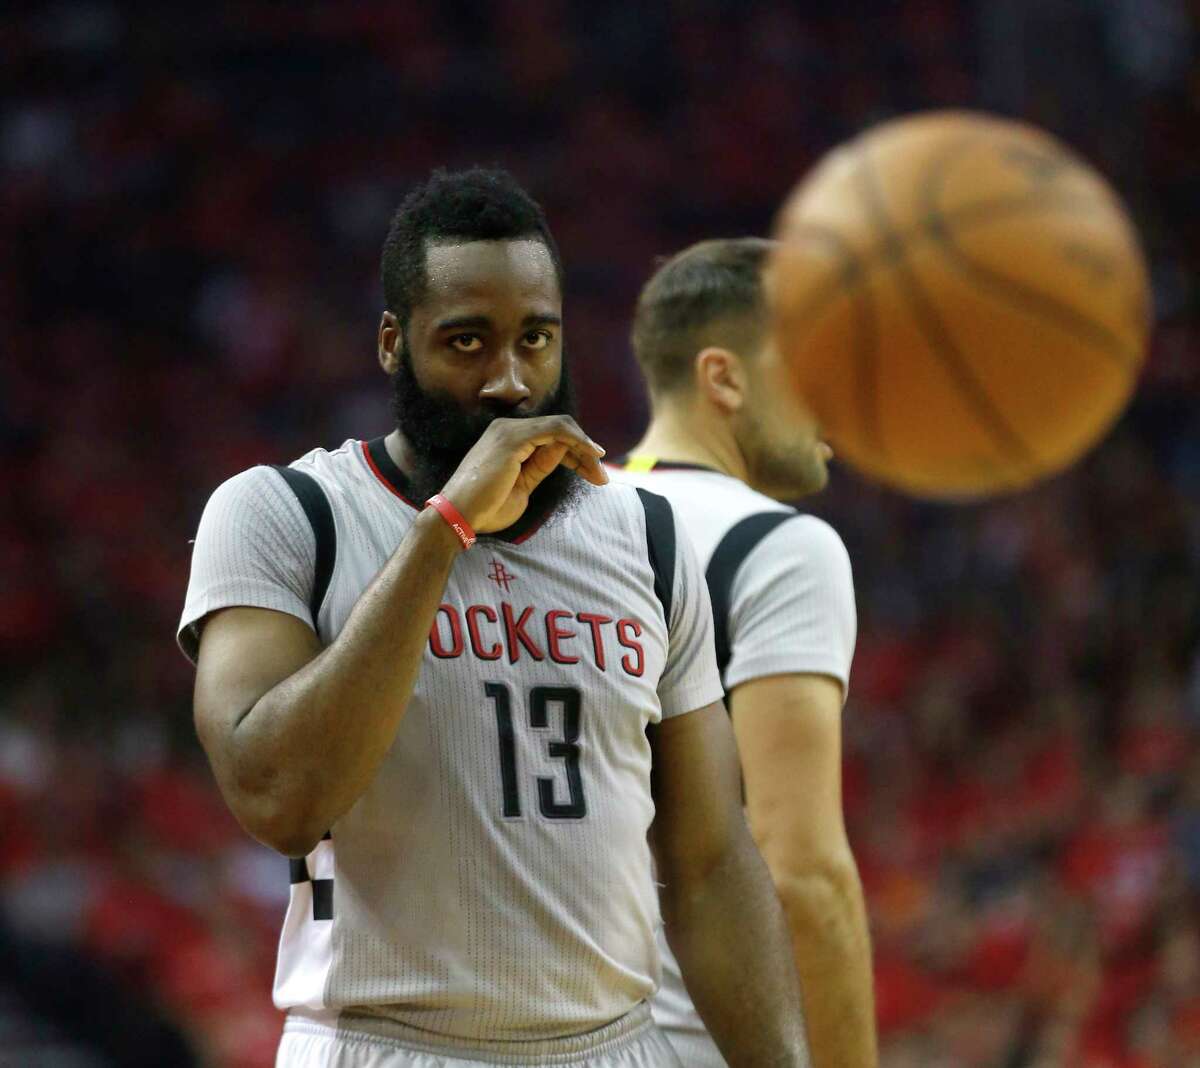 In Game 6 of the Western Conference semifinals, James Harden finished with a paltry 10 points on 2-of-11 shooting.